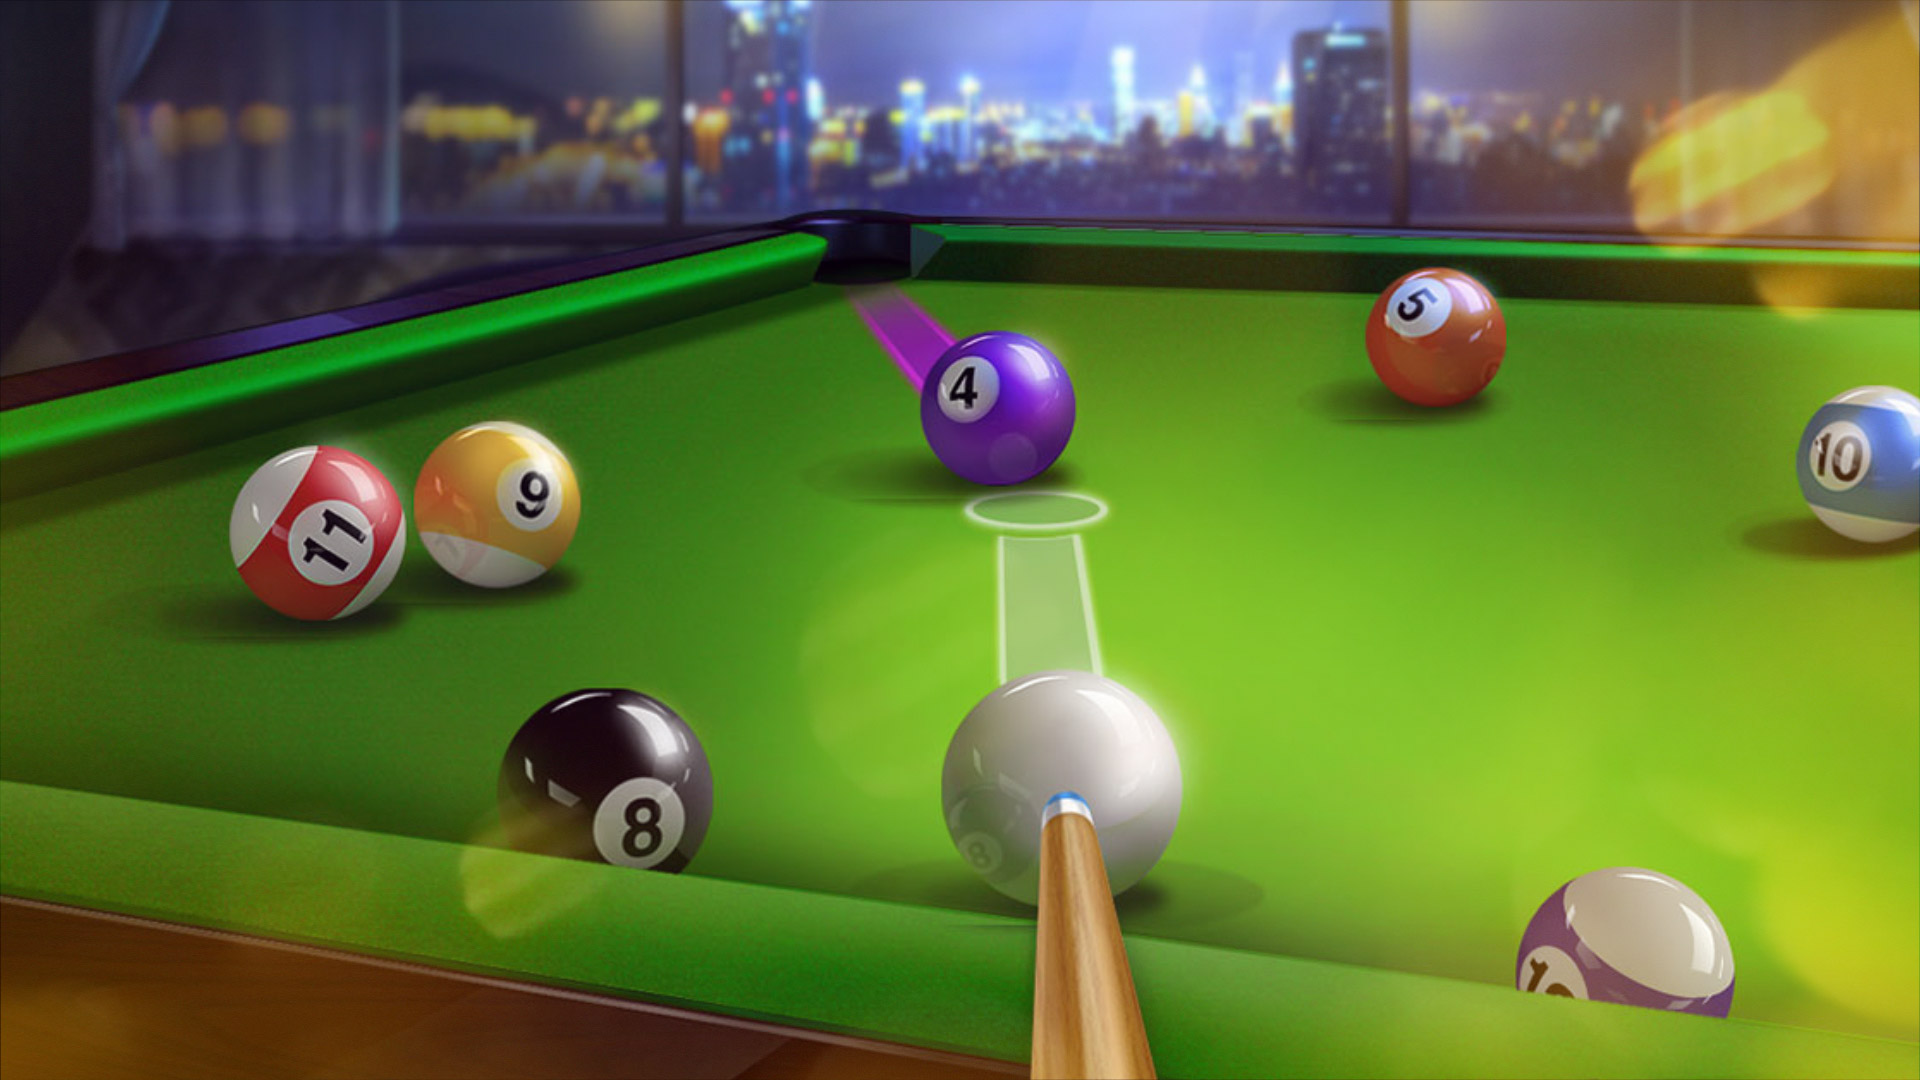 8 Ball Master - Play the Best Online Pool Game